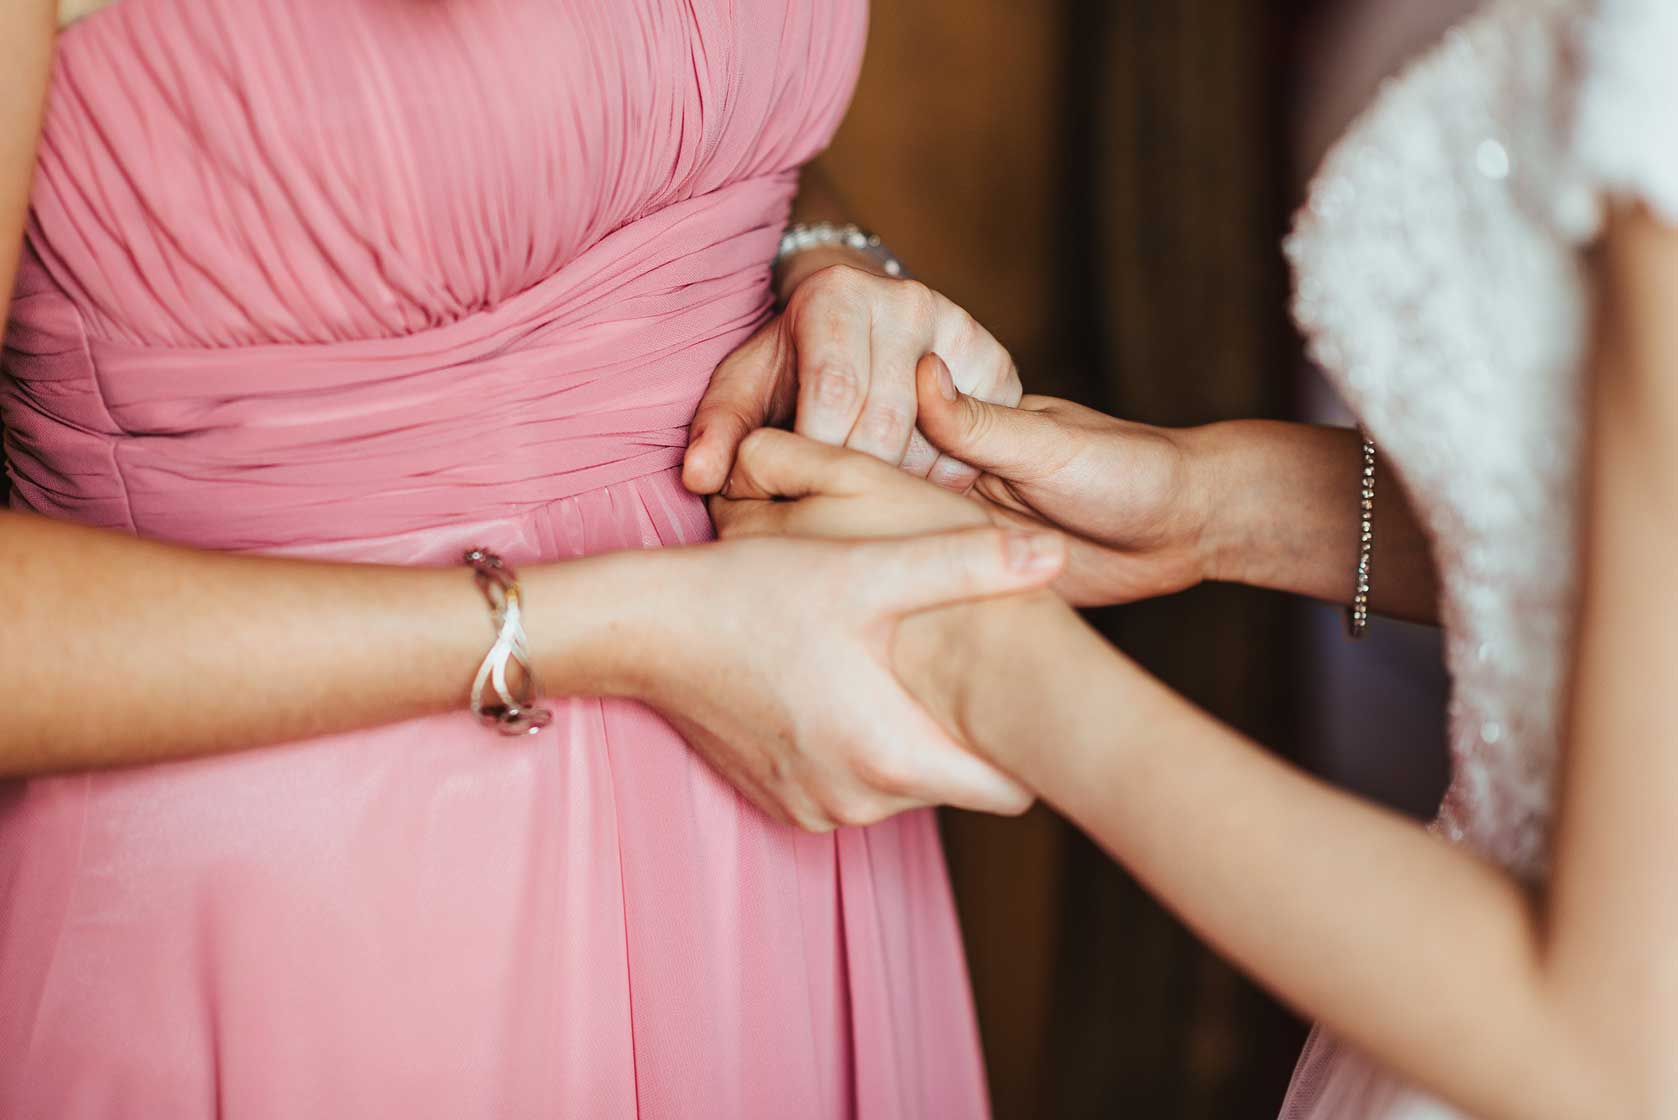 Bridesmaid provides emotional support